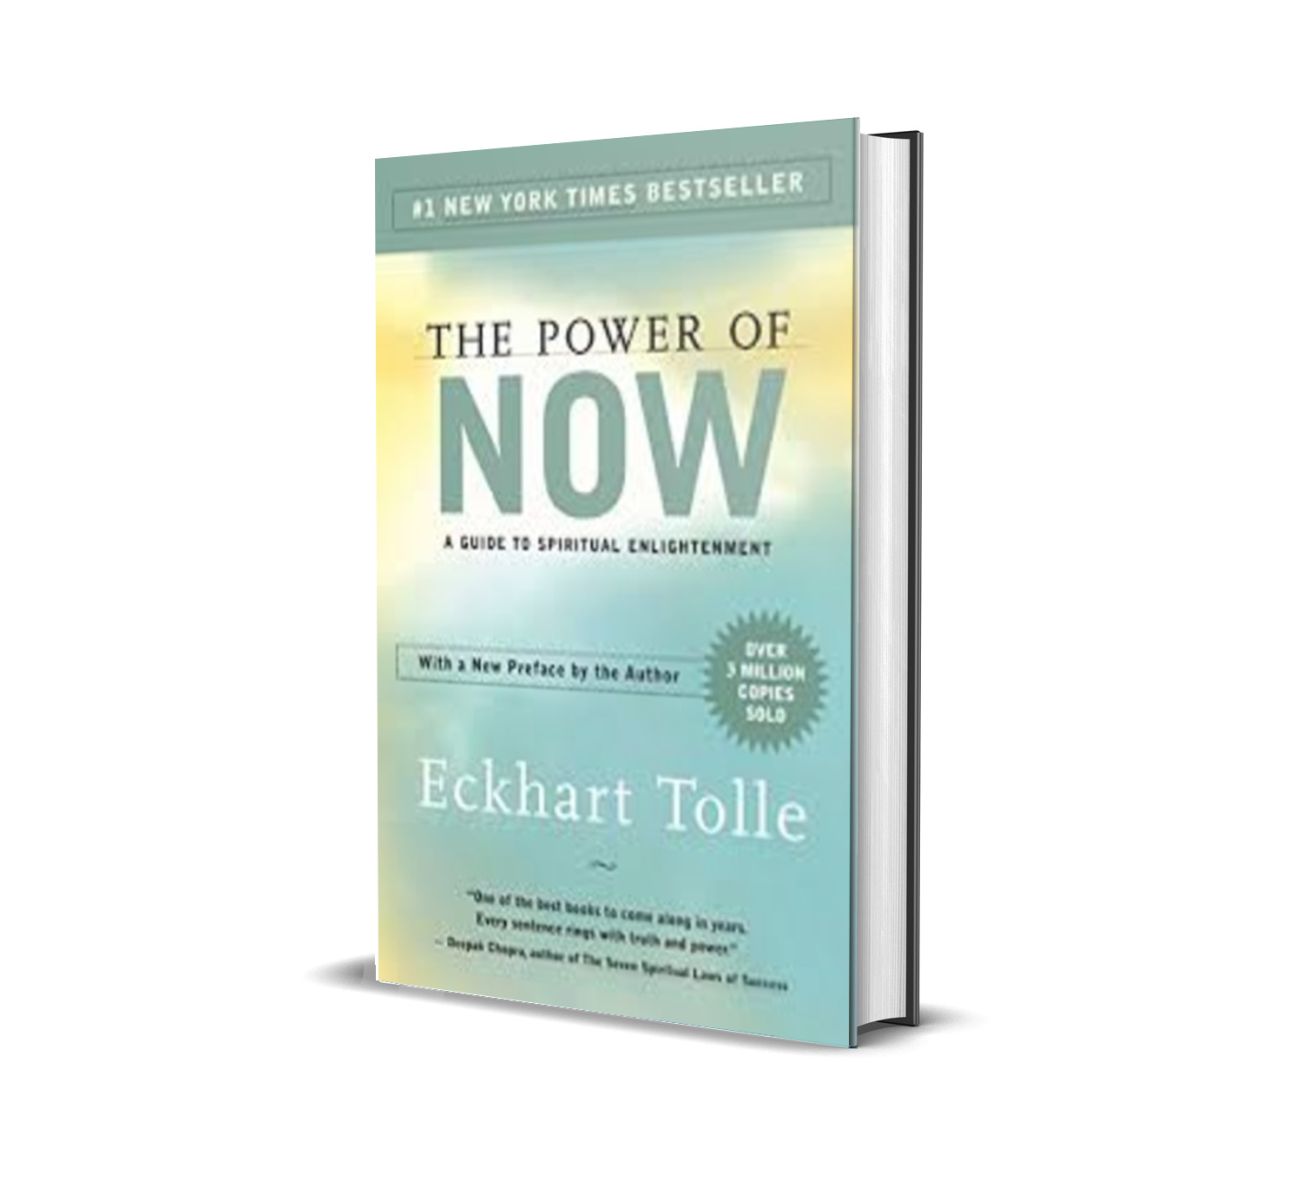 The Power of Now Spiritual Book by Eckhart Tolle